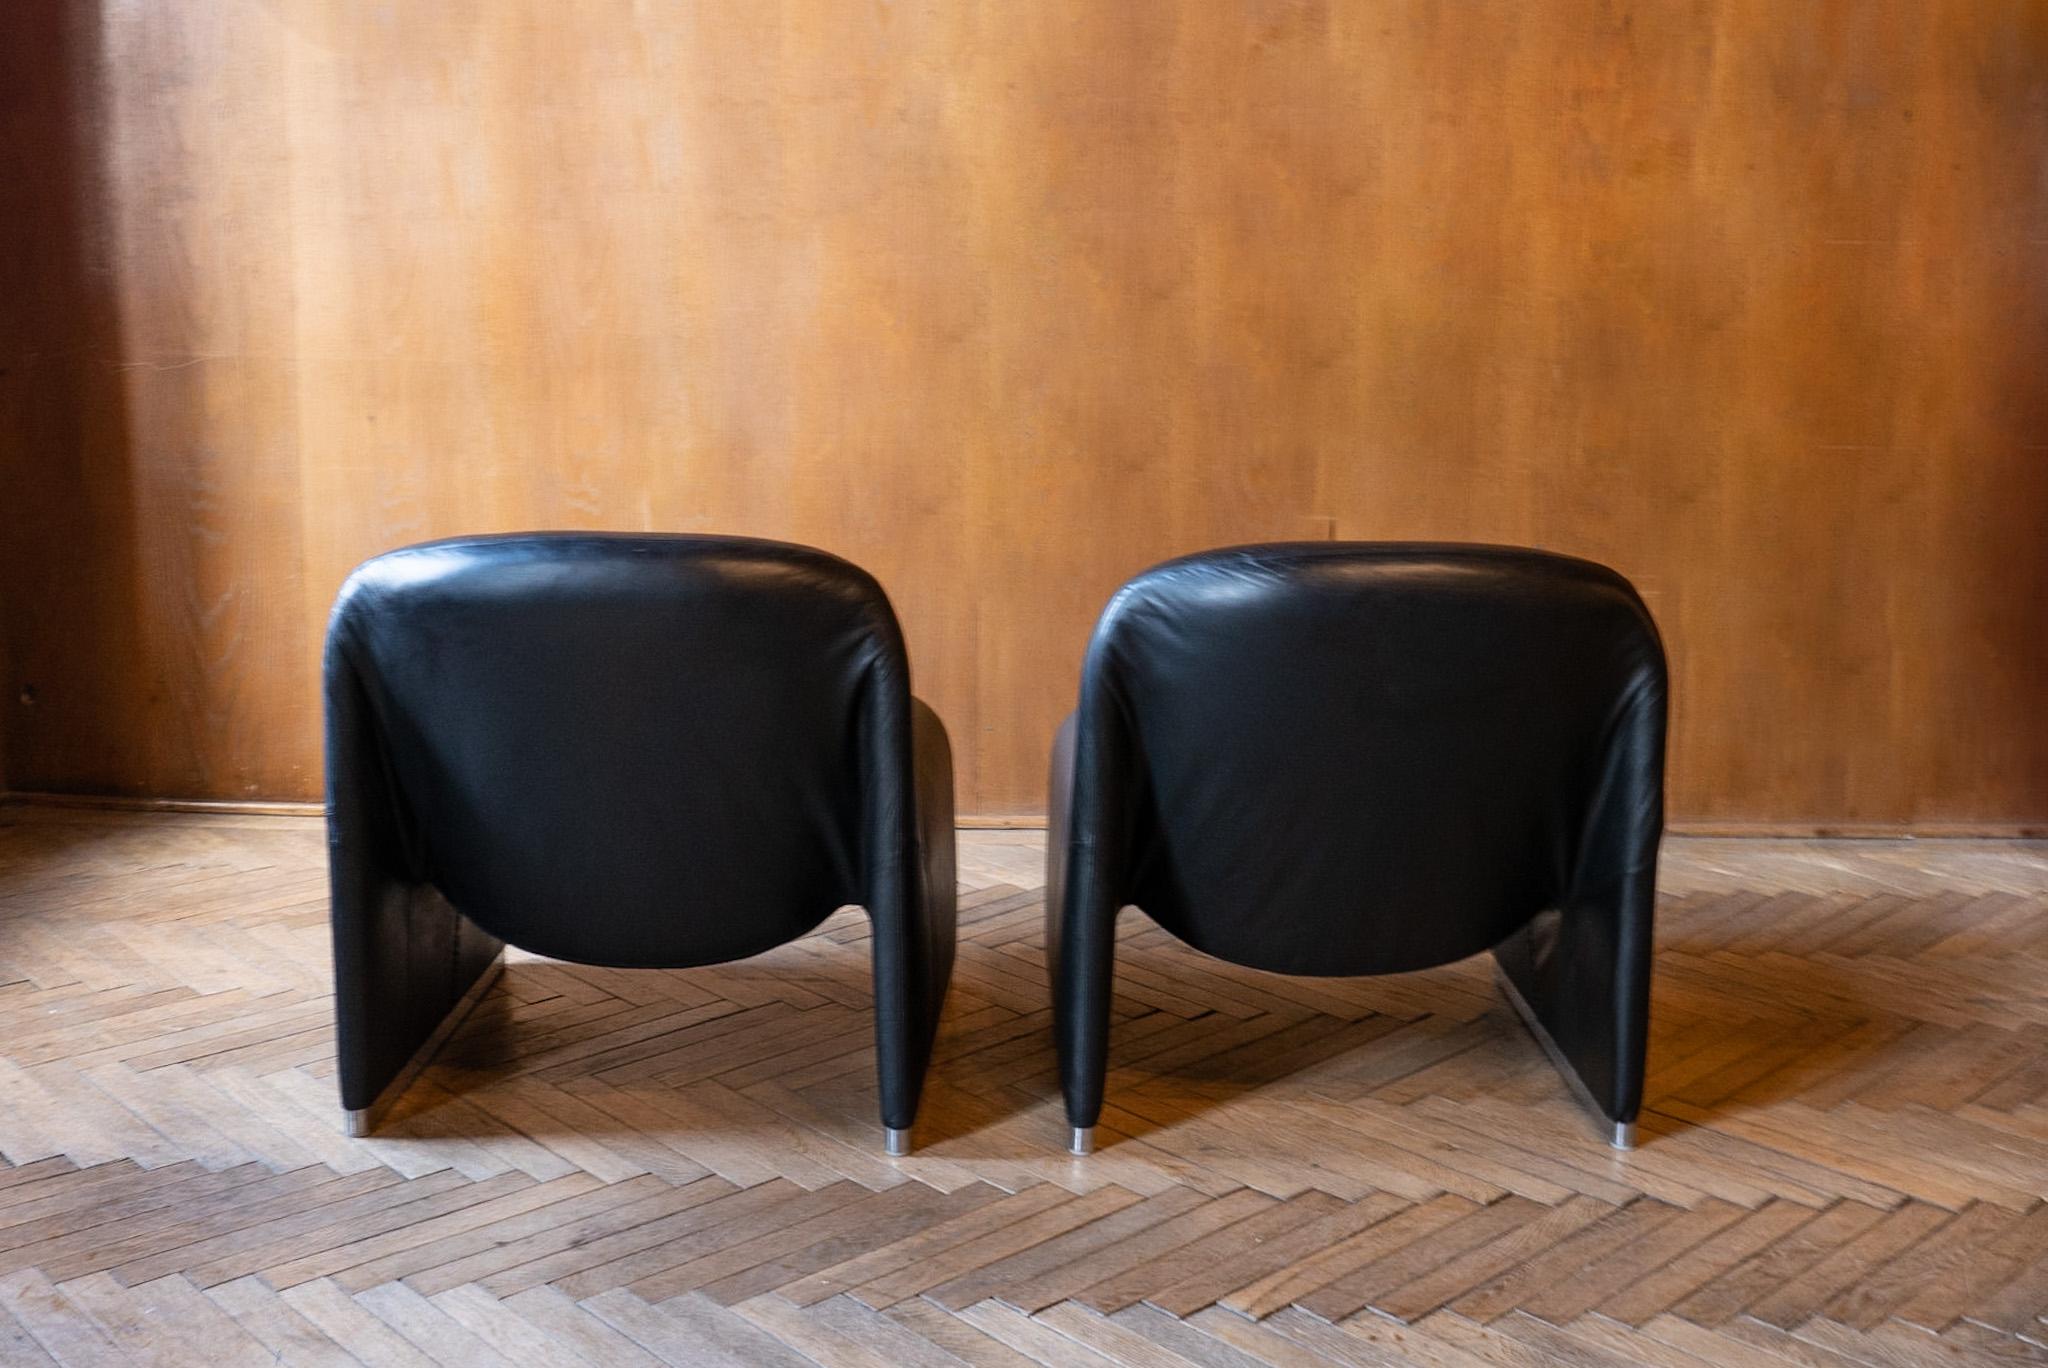 Aluminum Mid-Century Modern Black Leather Alky Chairs2 by Giancarlo Piretti, Italy 1970st